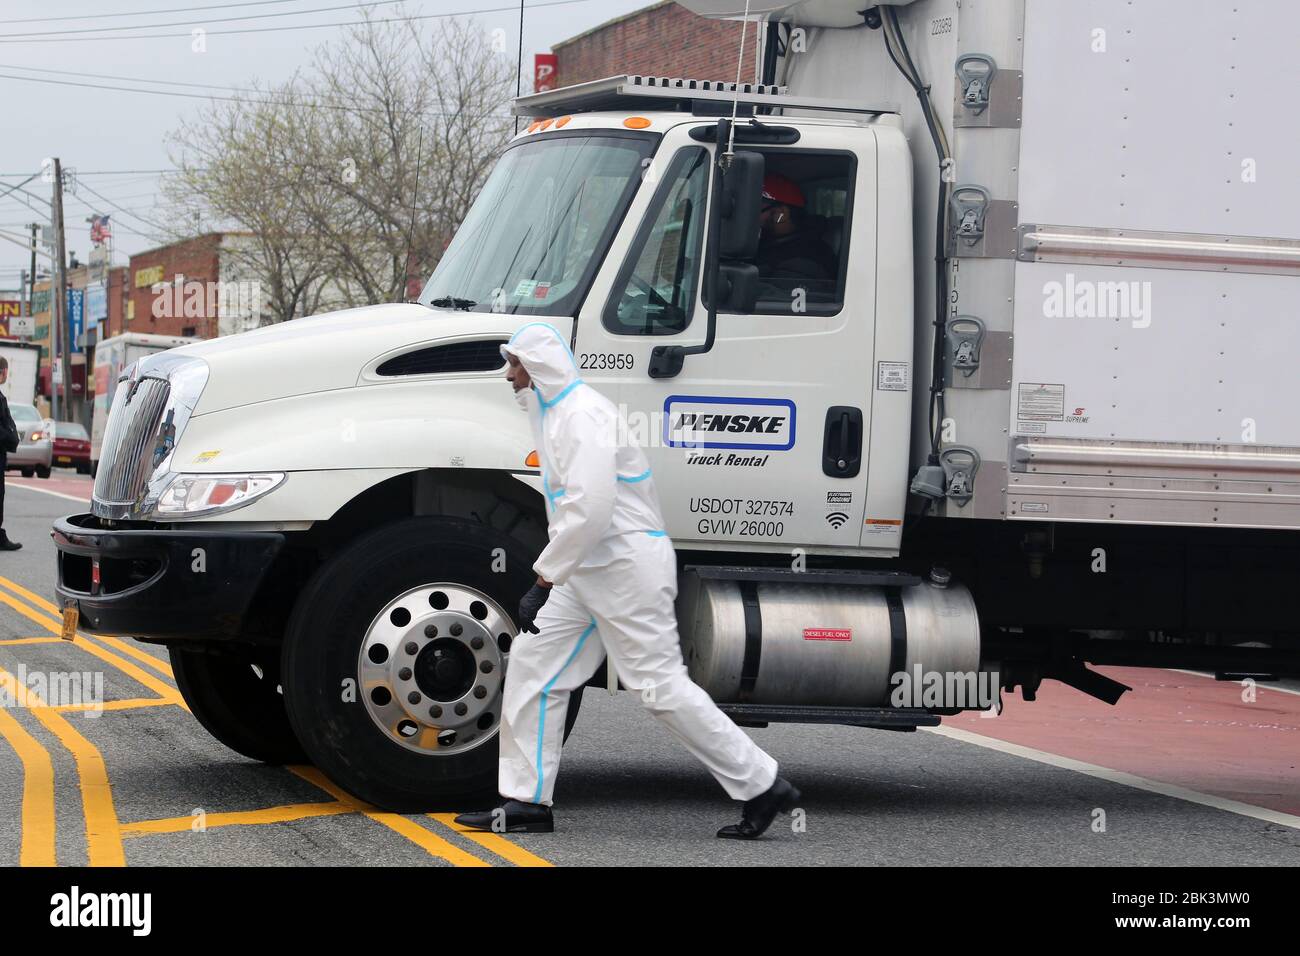 New York, New York, USA. 30th Apr, 2020. A worker dressed in hazmat walks in a hurry in front of a large refrigerated truck next to the Andrew T. Cleckley Funeral Home in Brooklyn where bodies non properly cared have been removed. 60 corpses were stored in 4 rented vehiciles lining the street along stores. Neighbors reported a foul smell and fluids dripping from the trucks. The funeral home was overwhelmed by COVID-19 deaths and ran out of room for bodies, which were awaiting cremation in New York. Credit: Marie Le Ble/ZUMA Wire/Alamy Live News Stock Photo